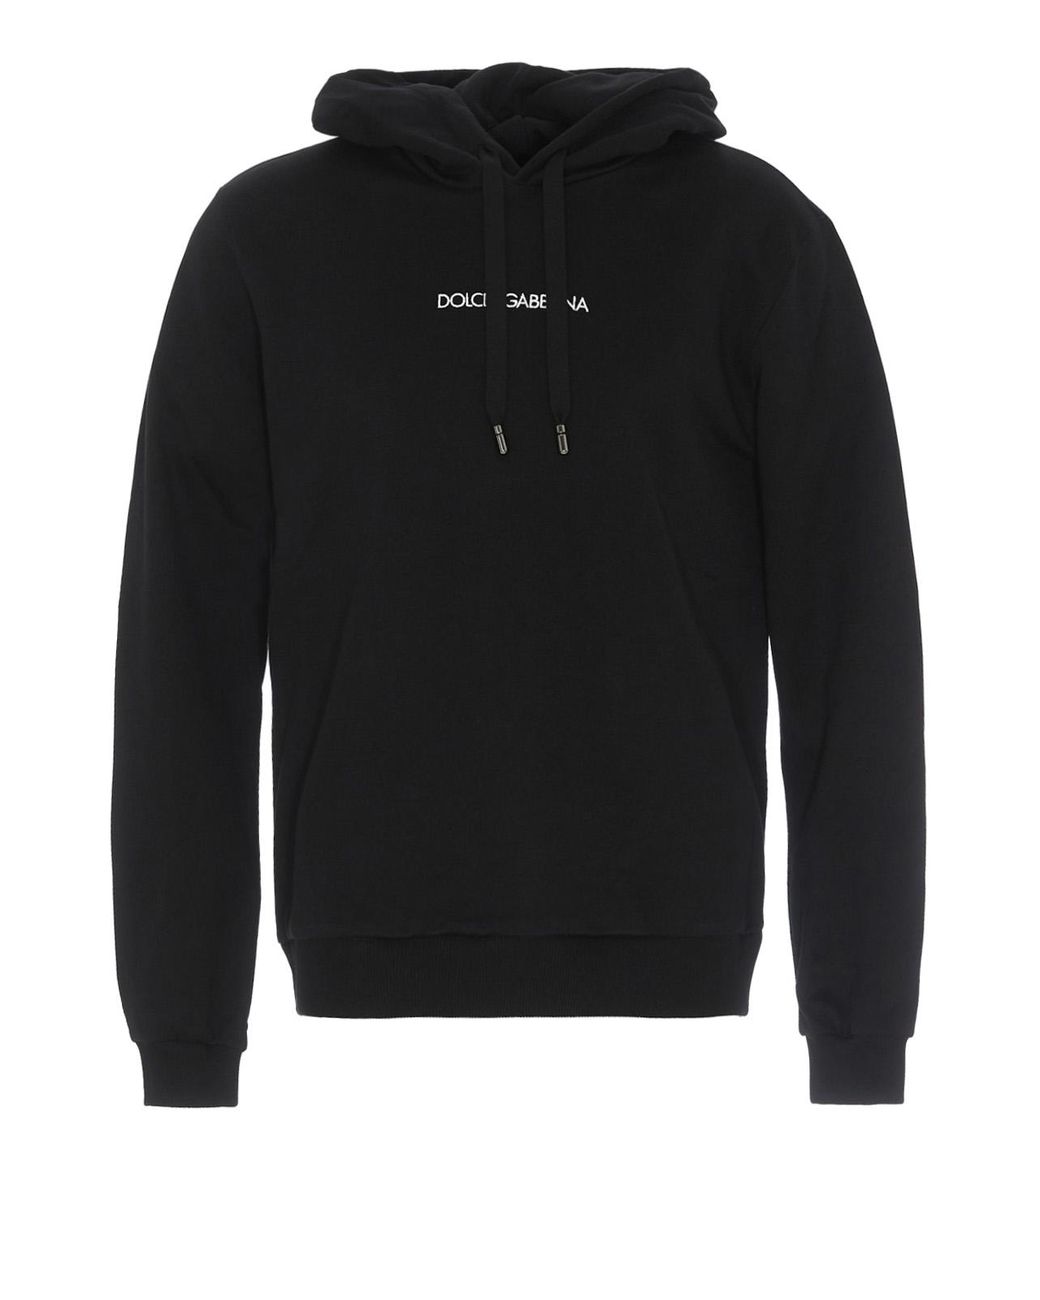 Dolce & Gabbana Logo Embroidery Hoodie in Black for Men - Lyst